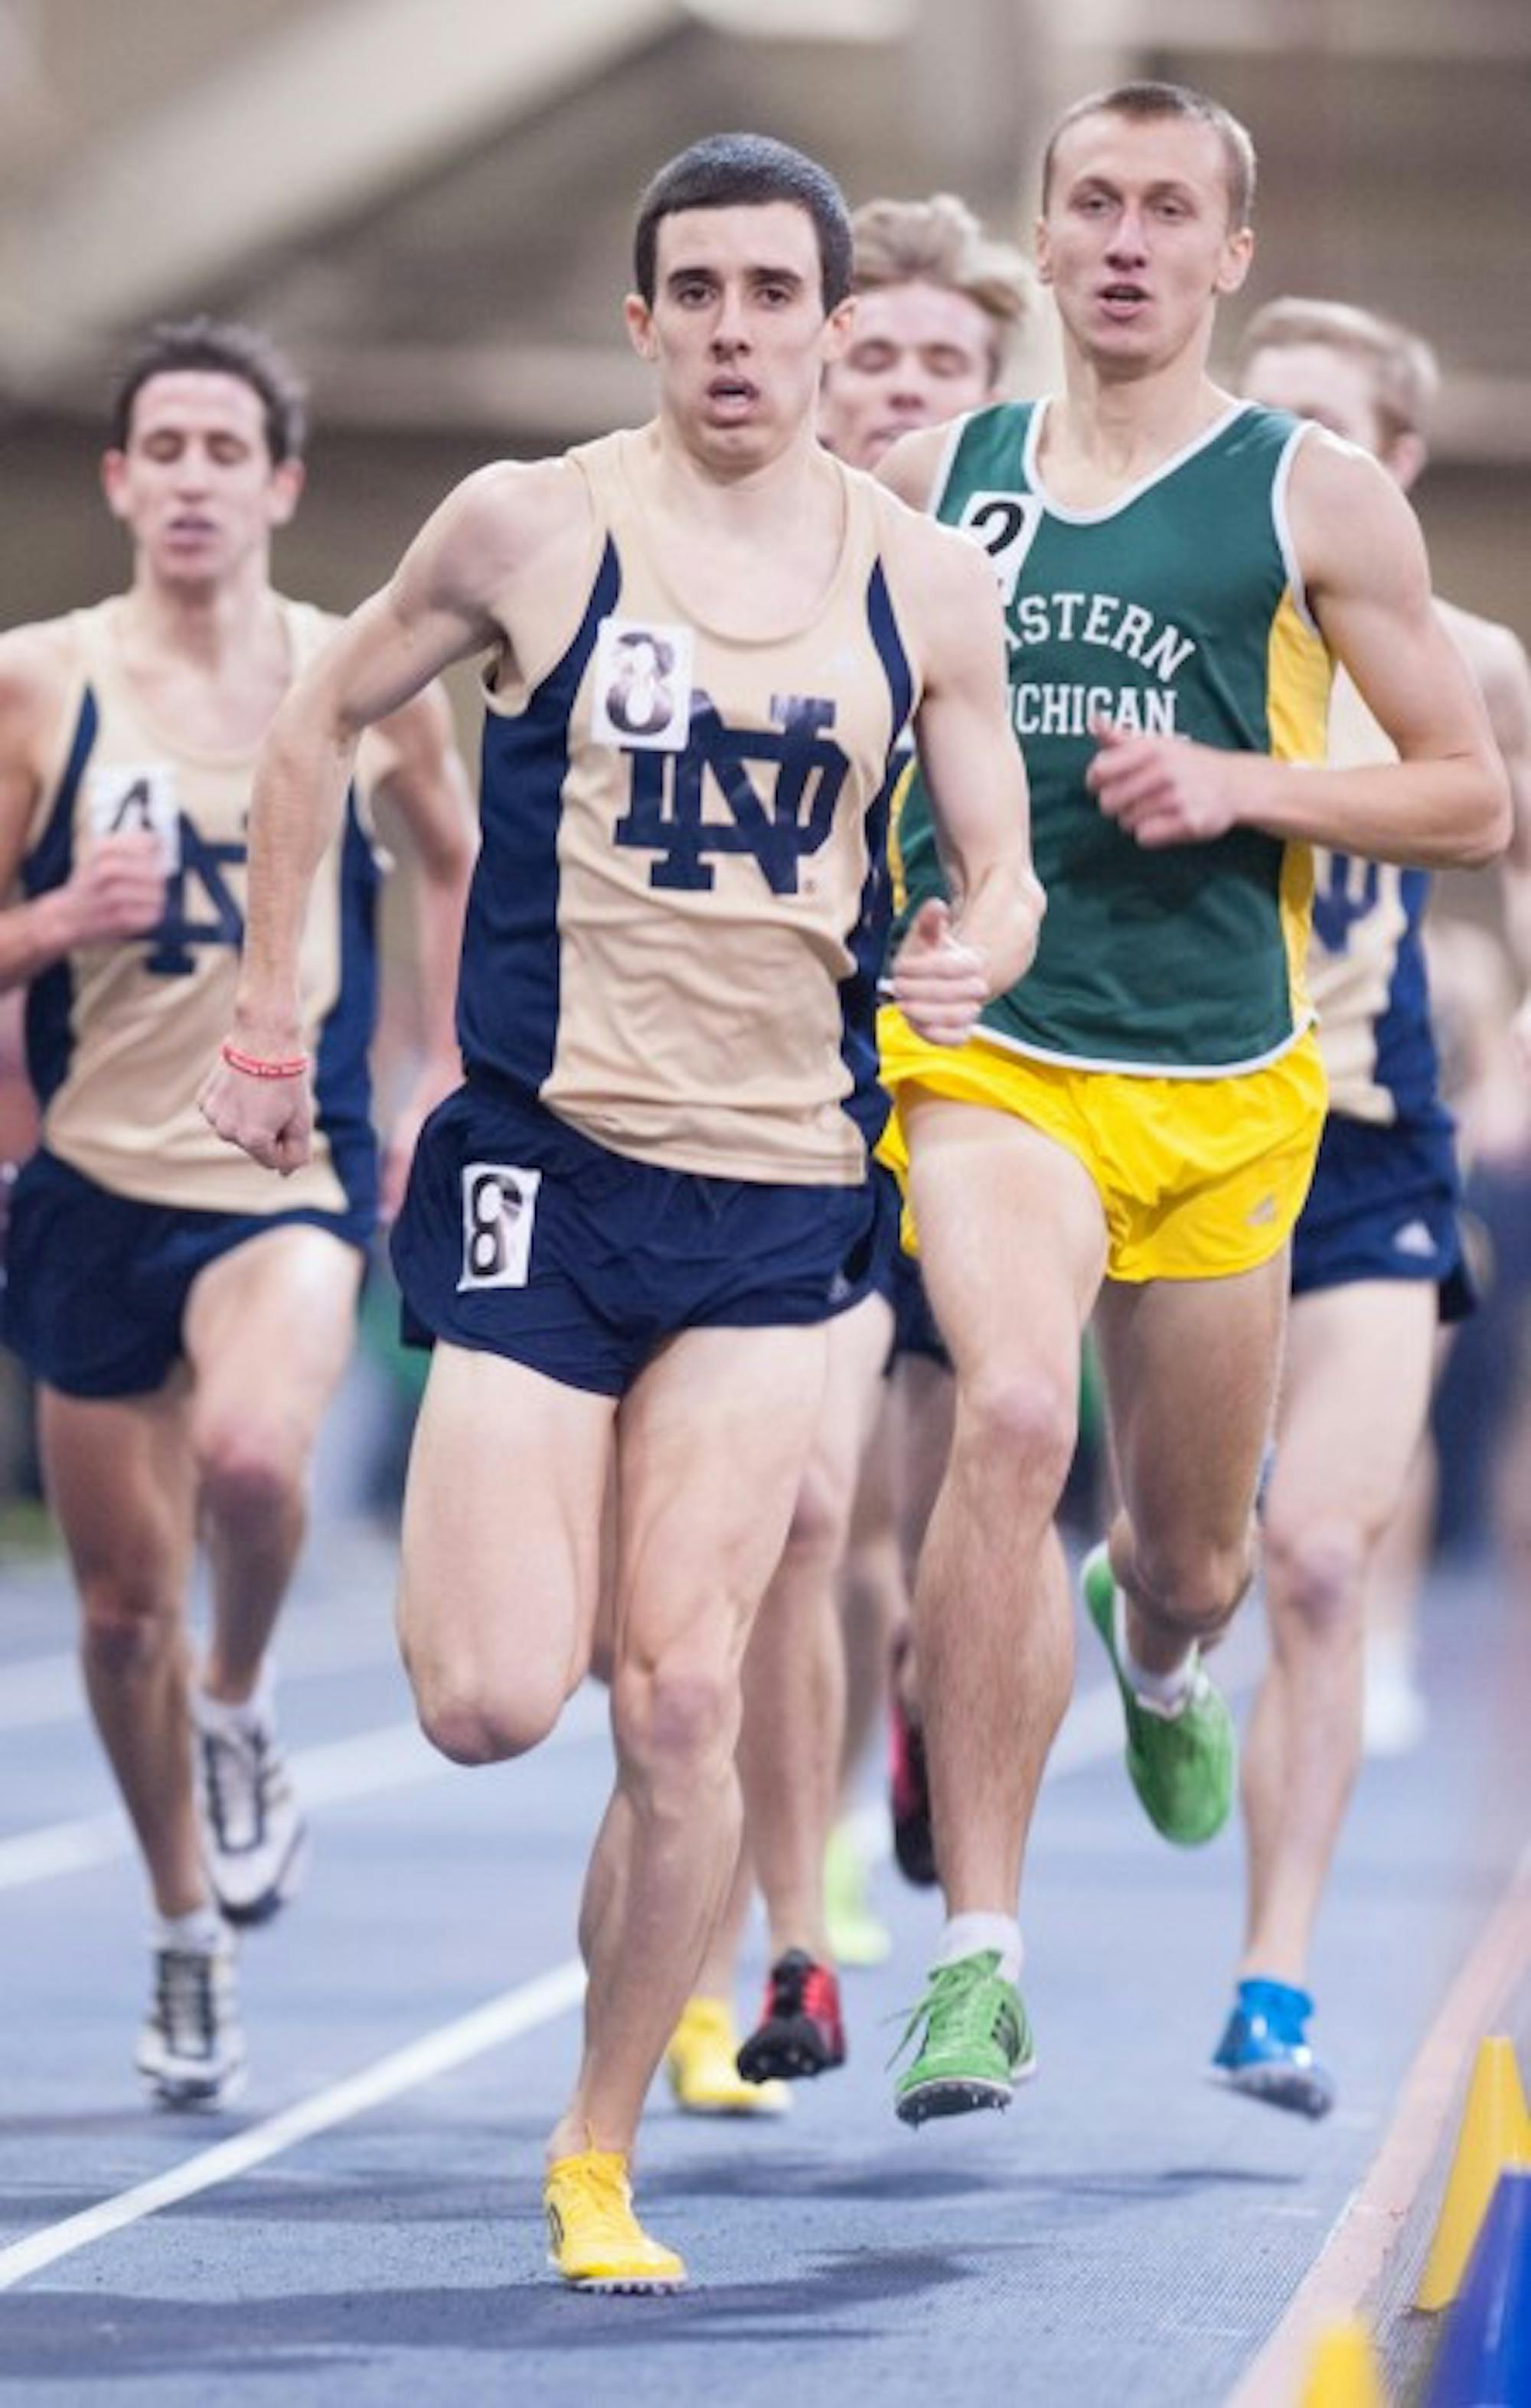 Former Irish All-American Jeremy Rae leads the field during the 2014 edition of the Meyo Mile on Feb. 7, 2014, at Loftus Sports Center. Rae won the race and set a school record at 3:57.25.